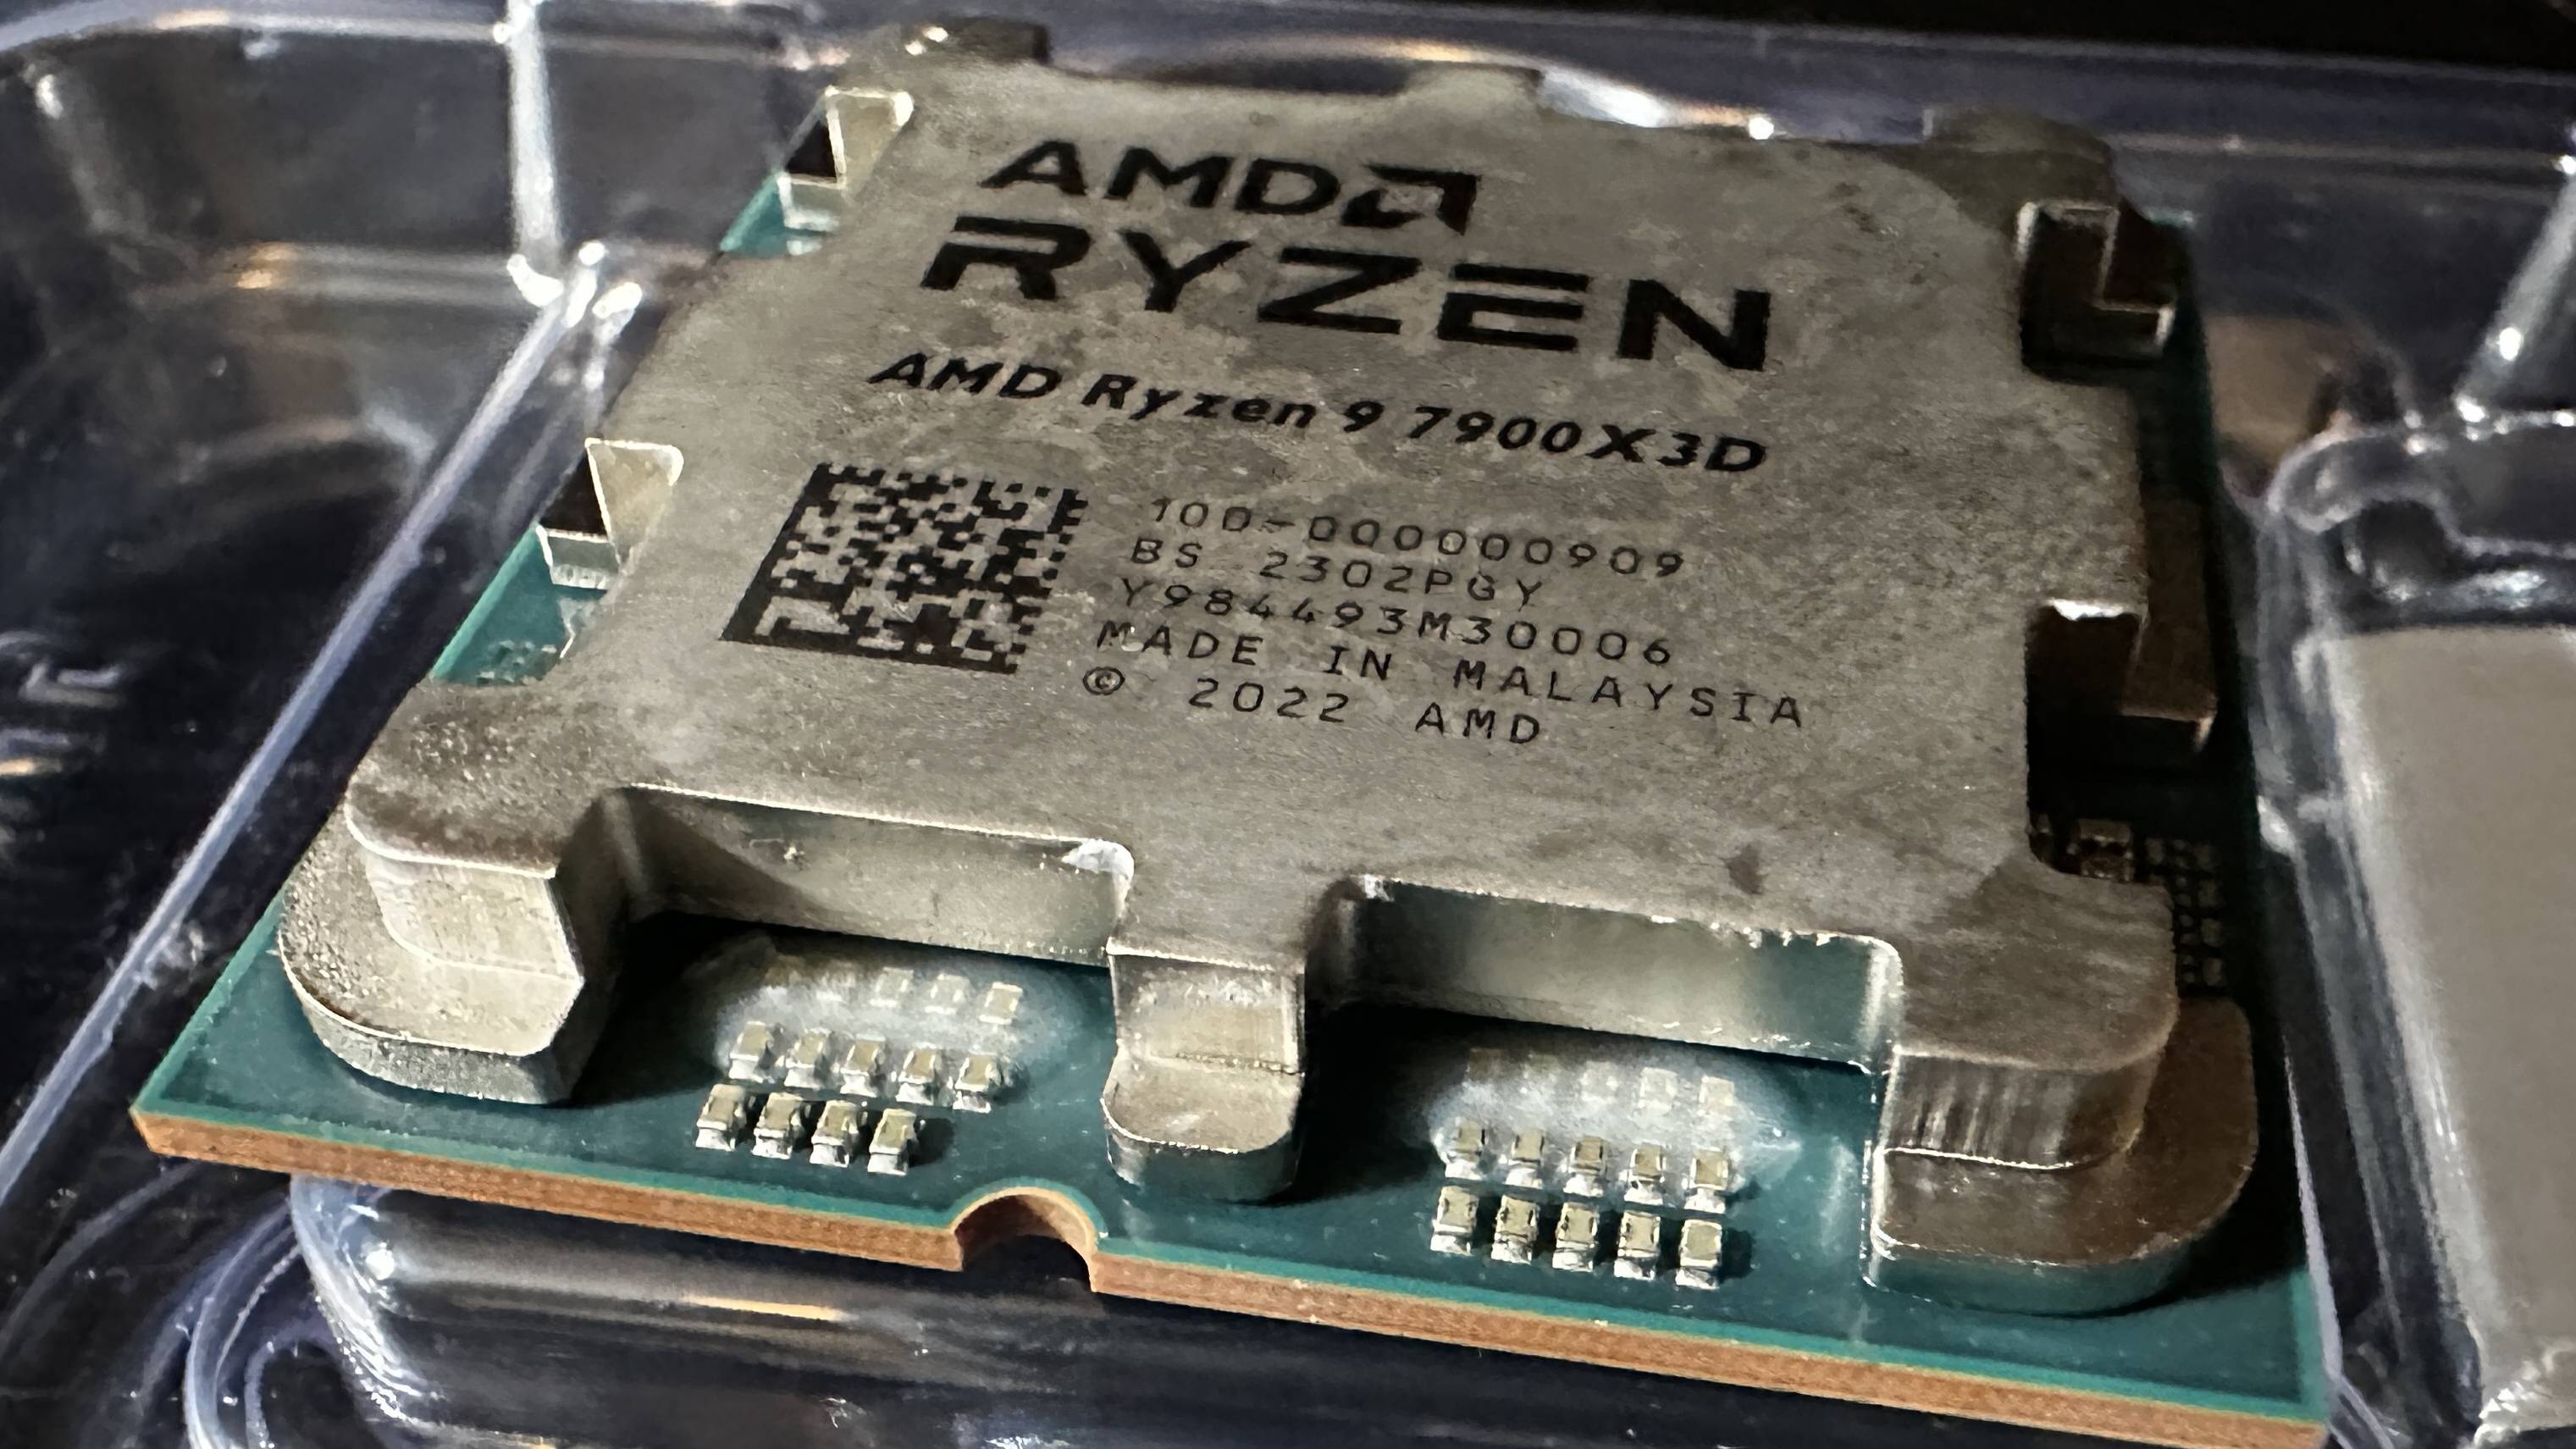 amd-ryzen-9000x3d-could-get-full-overclocking-abilities,-making-life-even-more-difficult-for-intel-arrow-lake-cpus